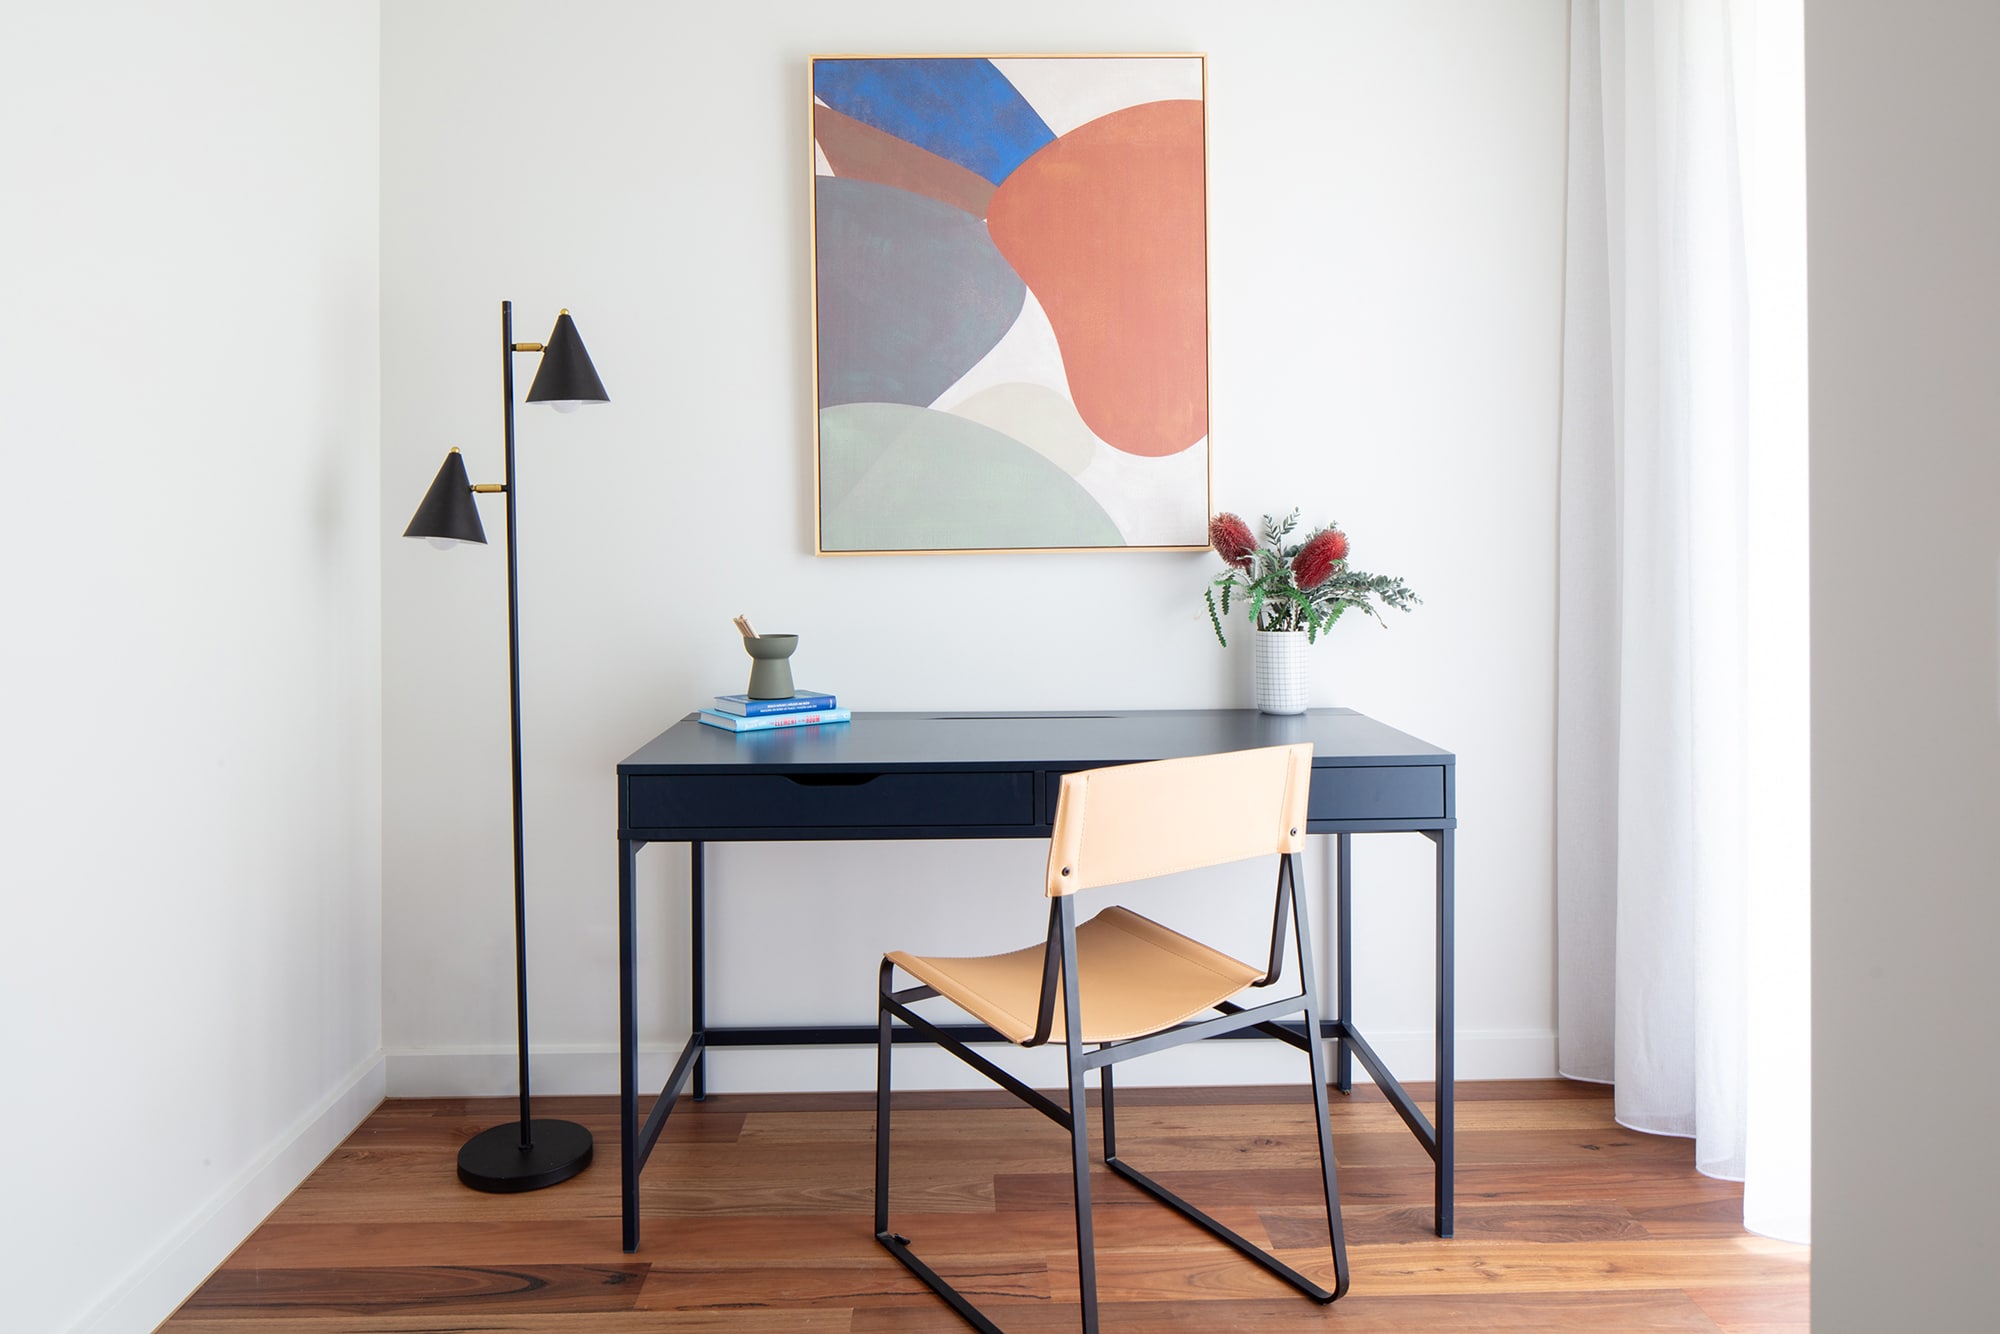 Study nook with desk, chair, floor lamp and modern colourful wall painting